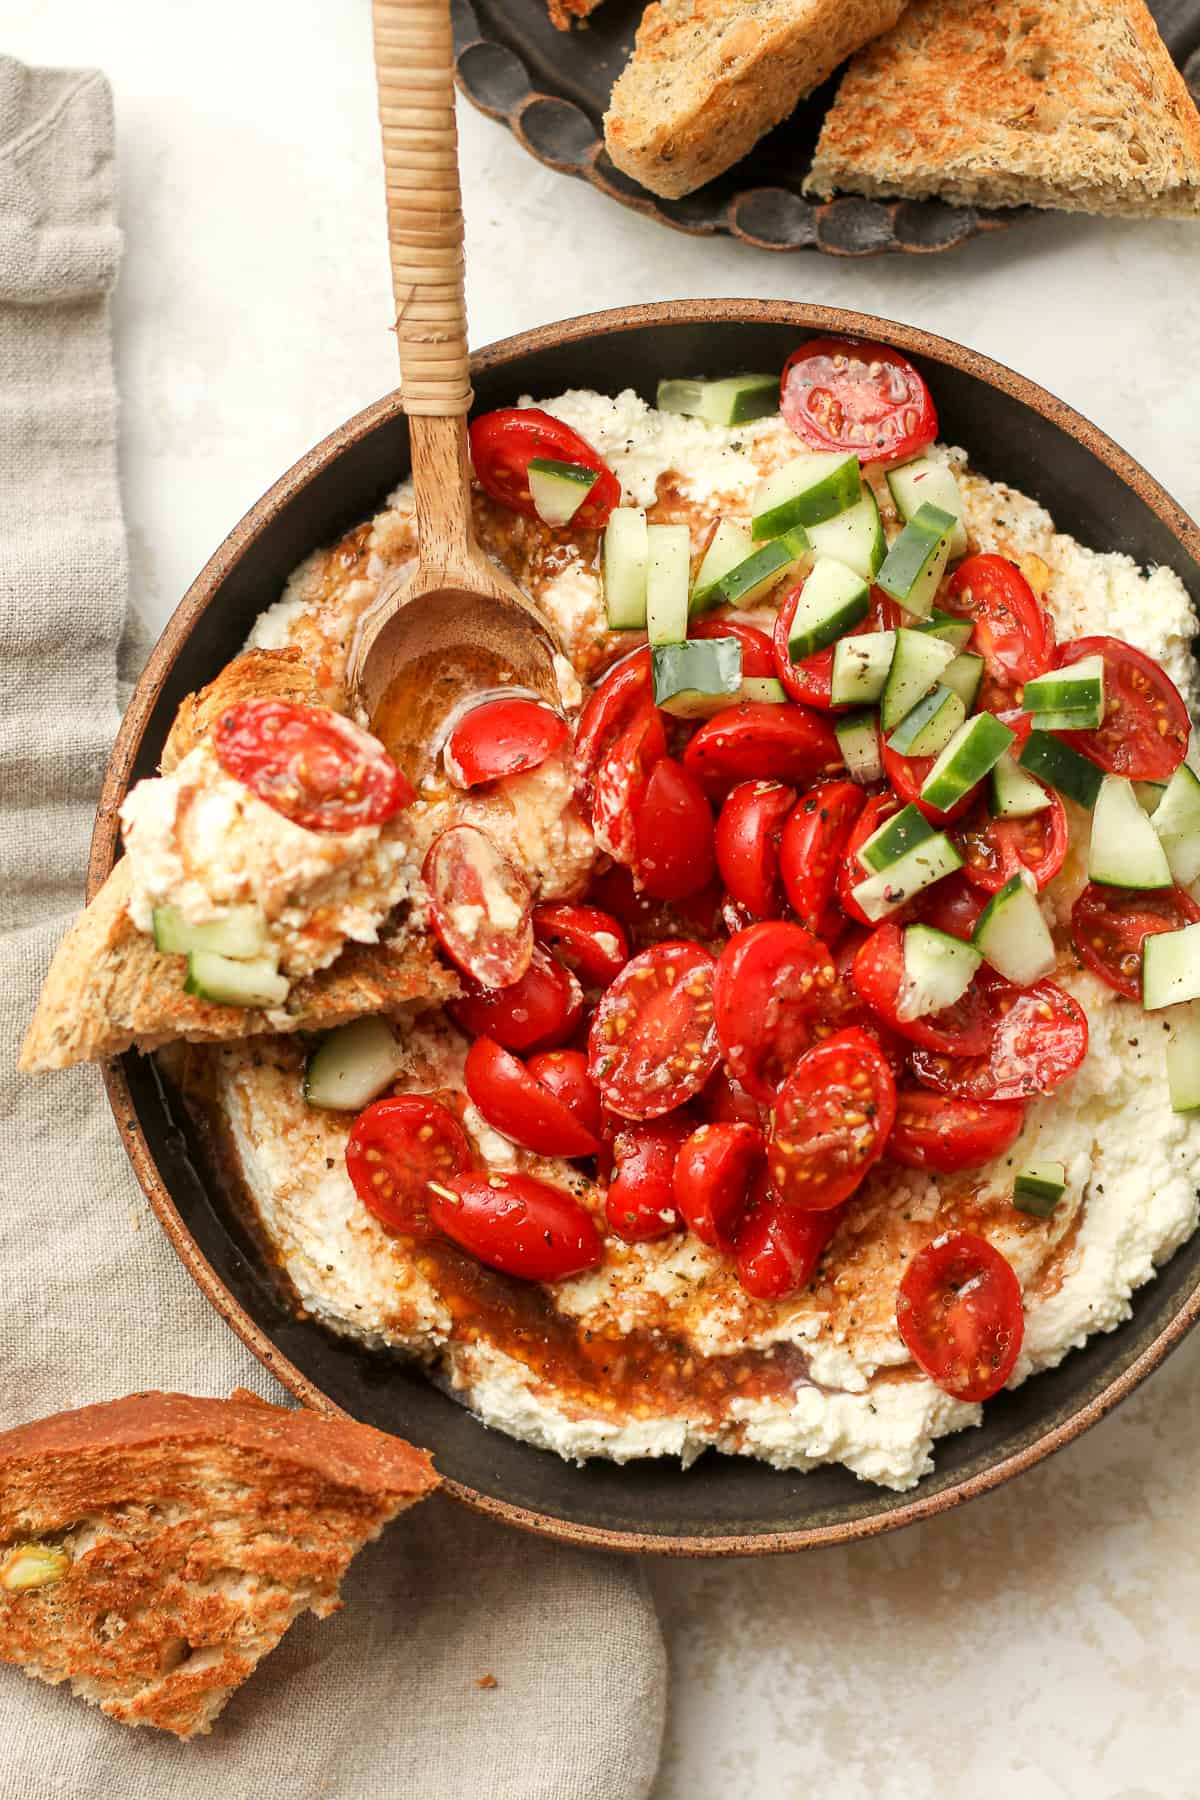 A bowl of the Greek feta dip with some piled on some toasty bread.